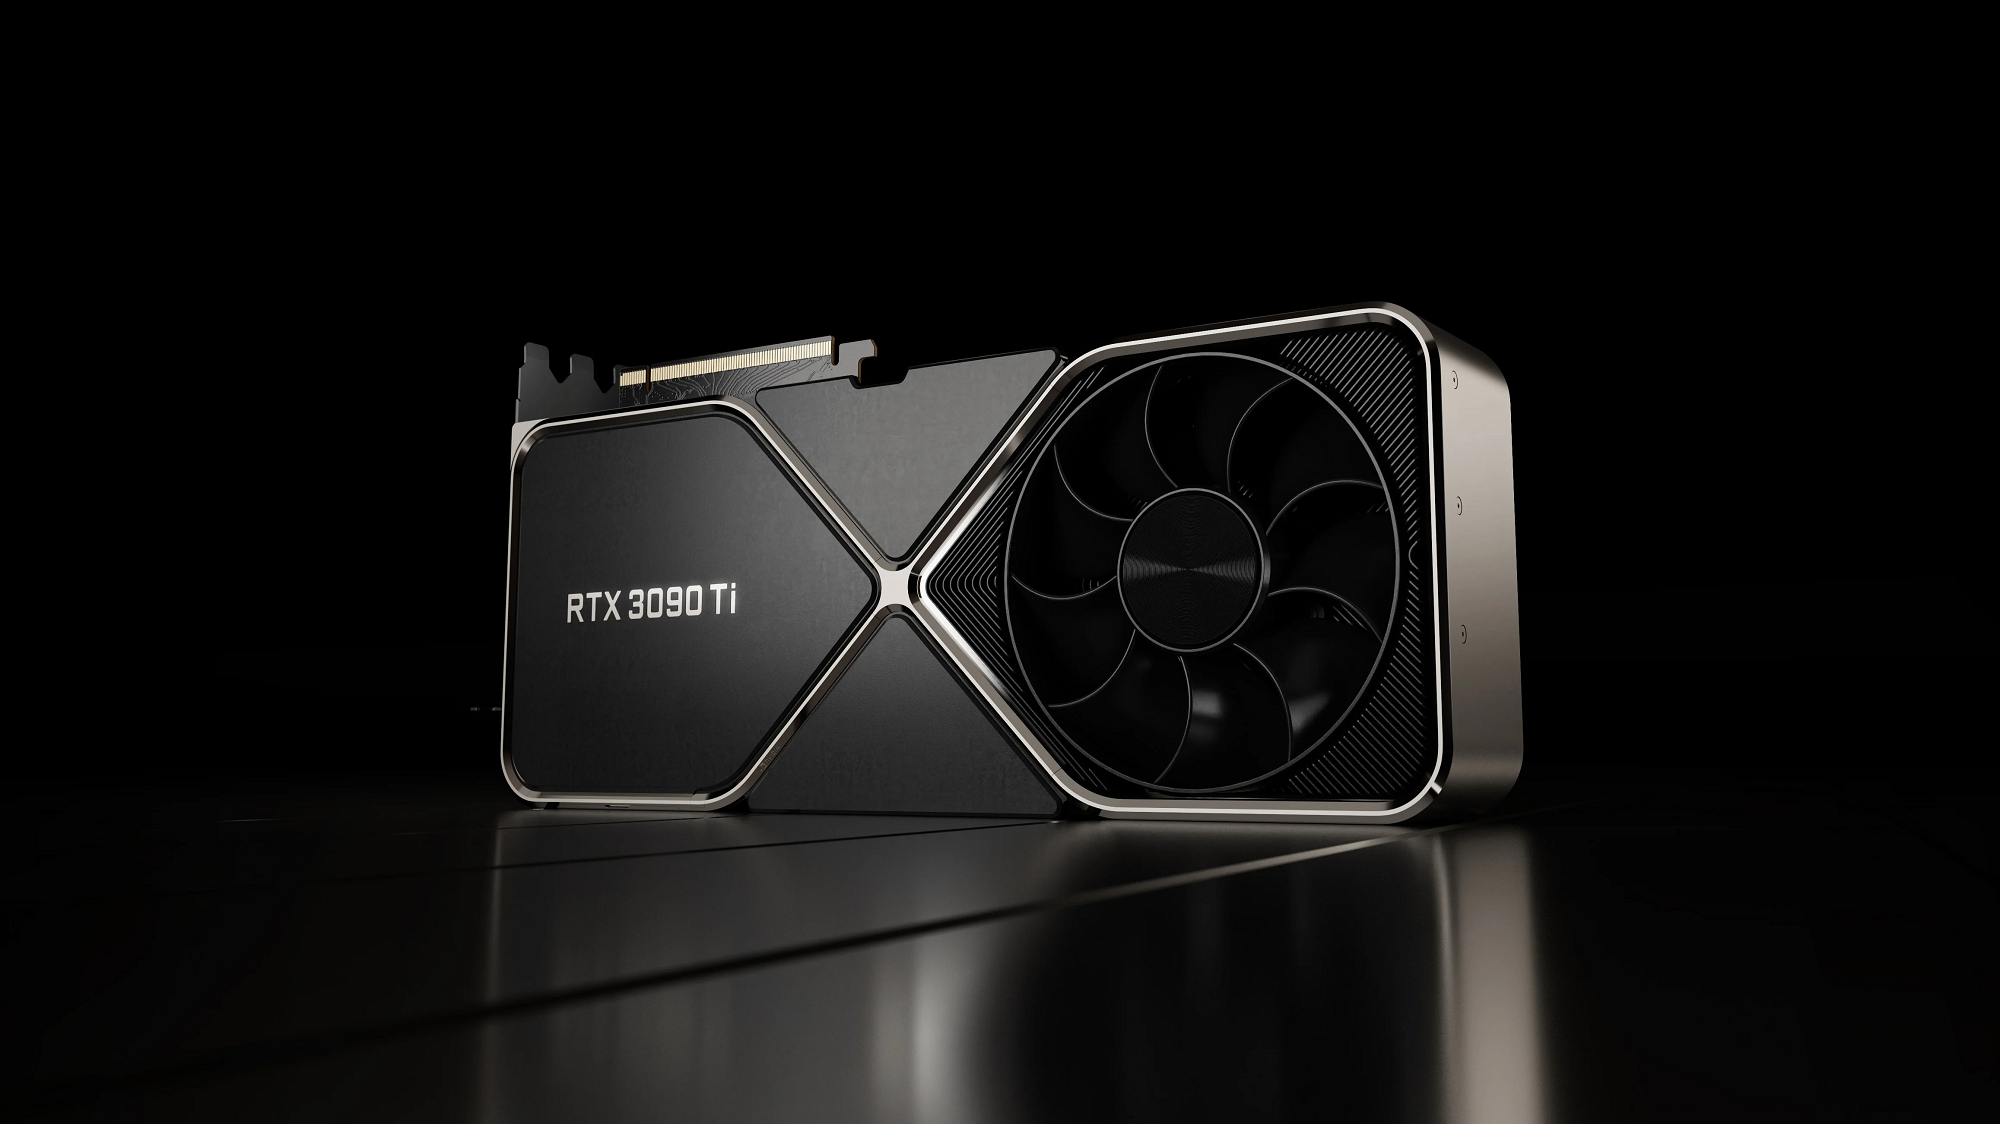 NVIDIA GeForce RTX 3090 Ti graphics card suddenly went on sale in the U.S. for $1600 with a recommended price of $2000